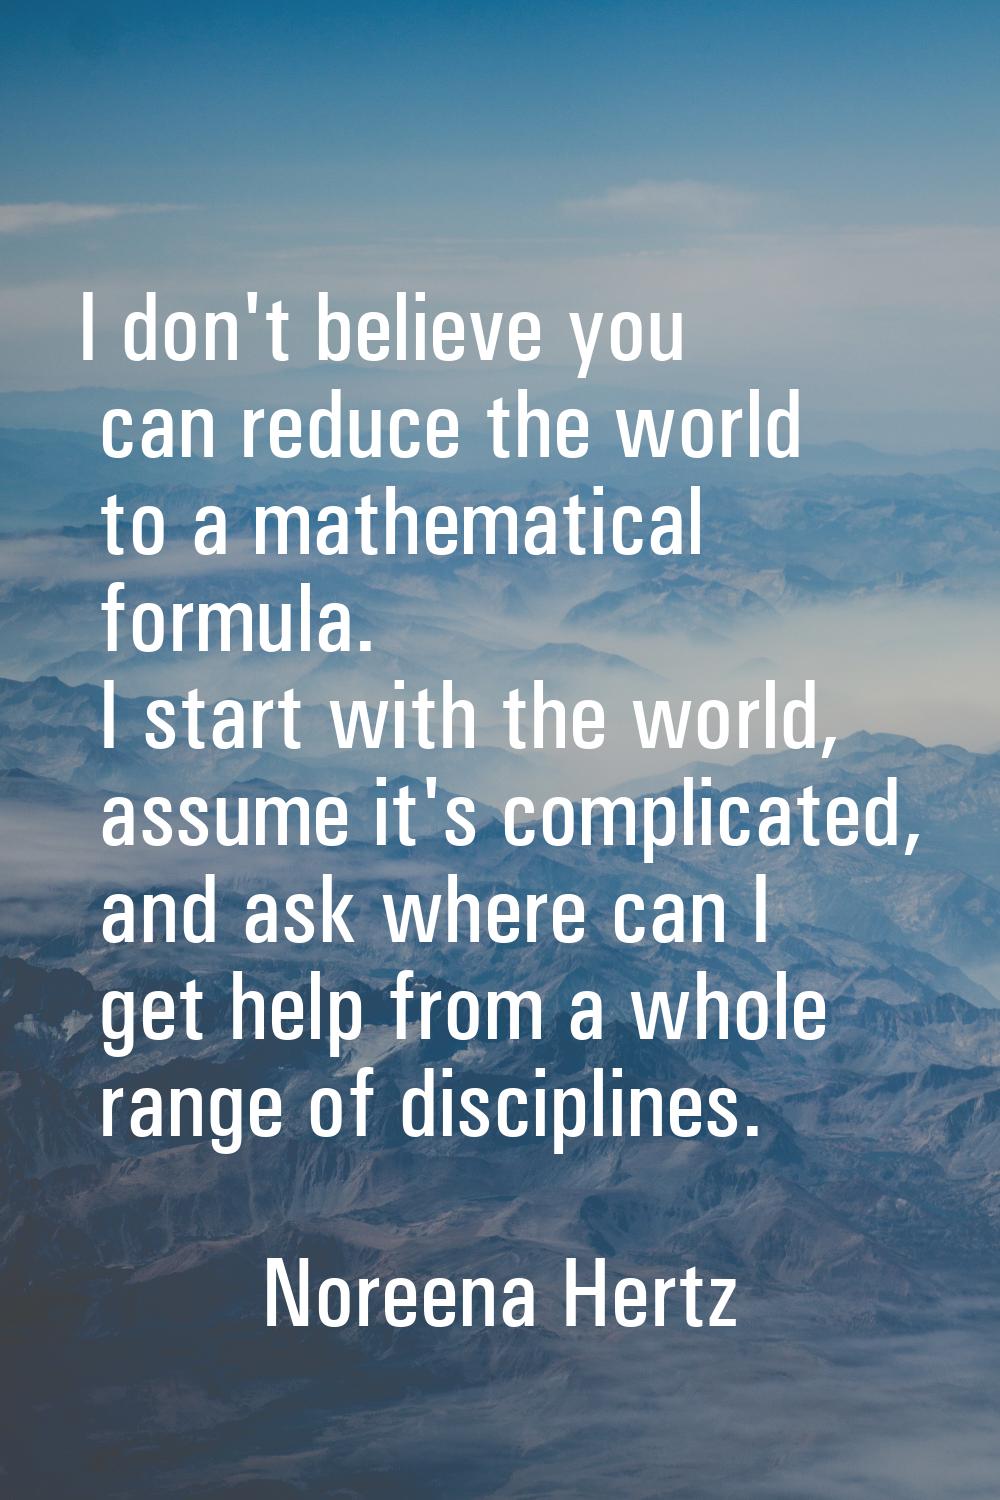 I don't believe you can reduce the world to a mathematical formula. I start with the world, assume 